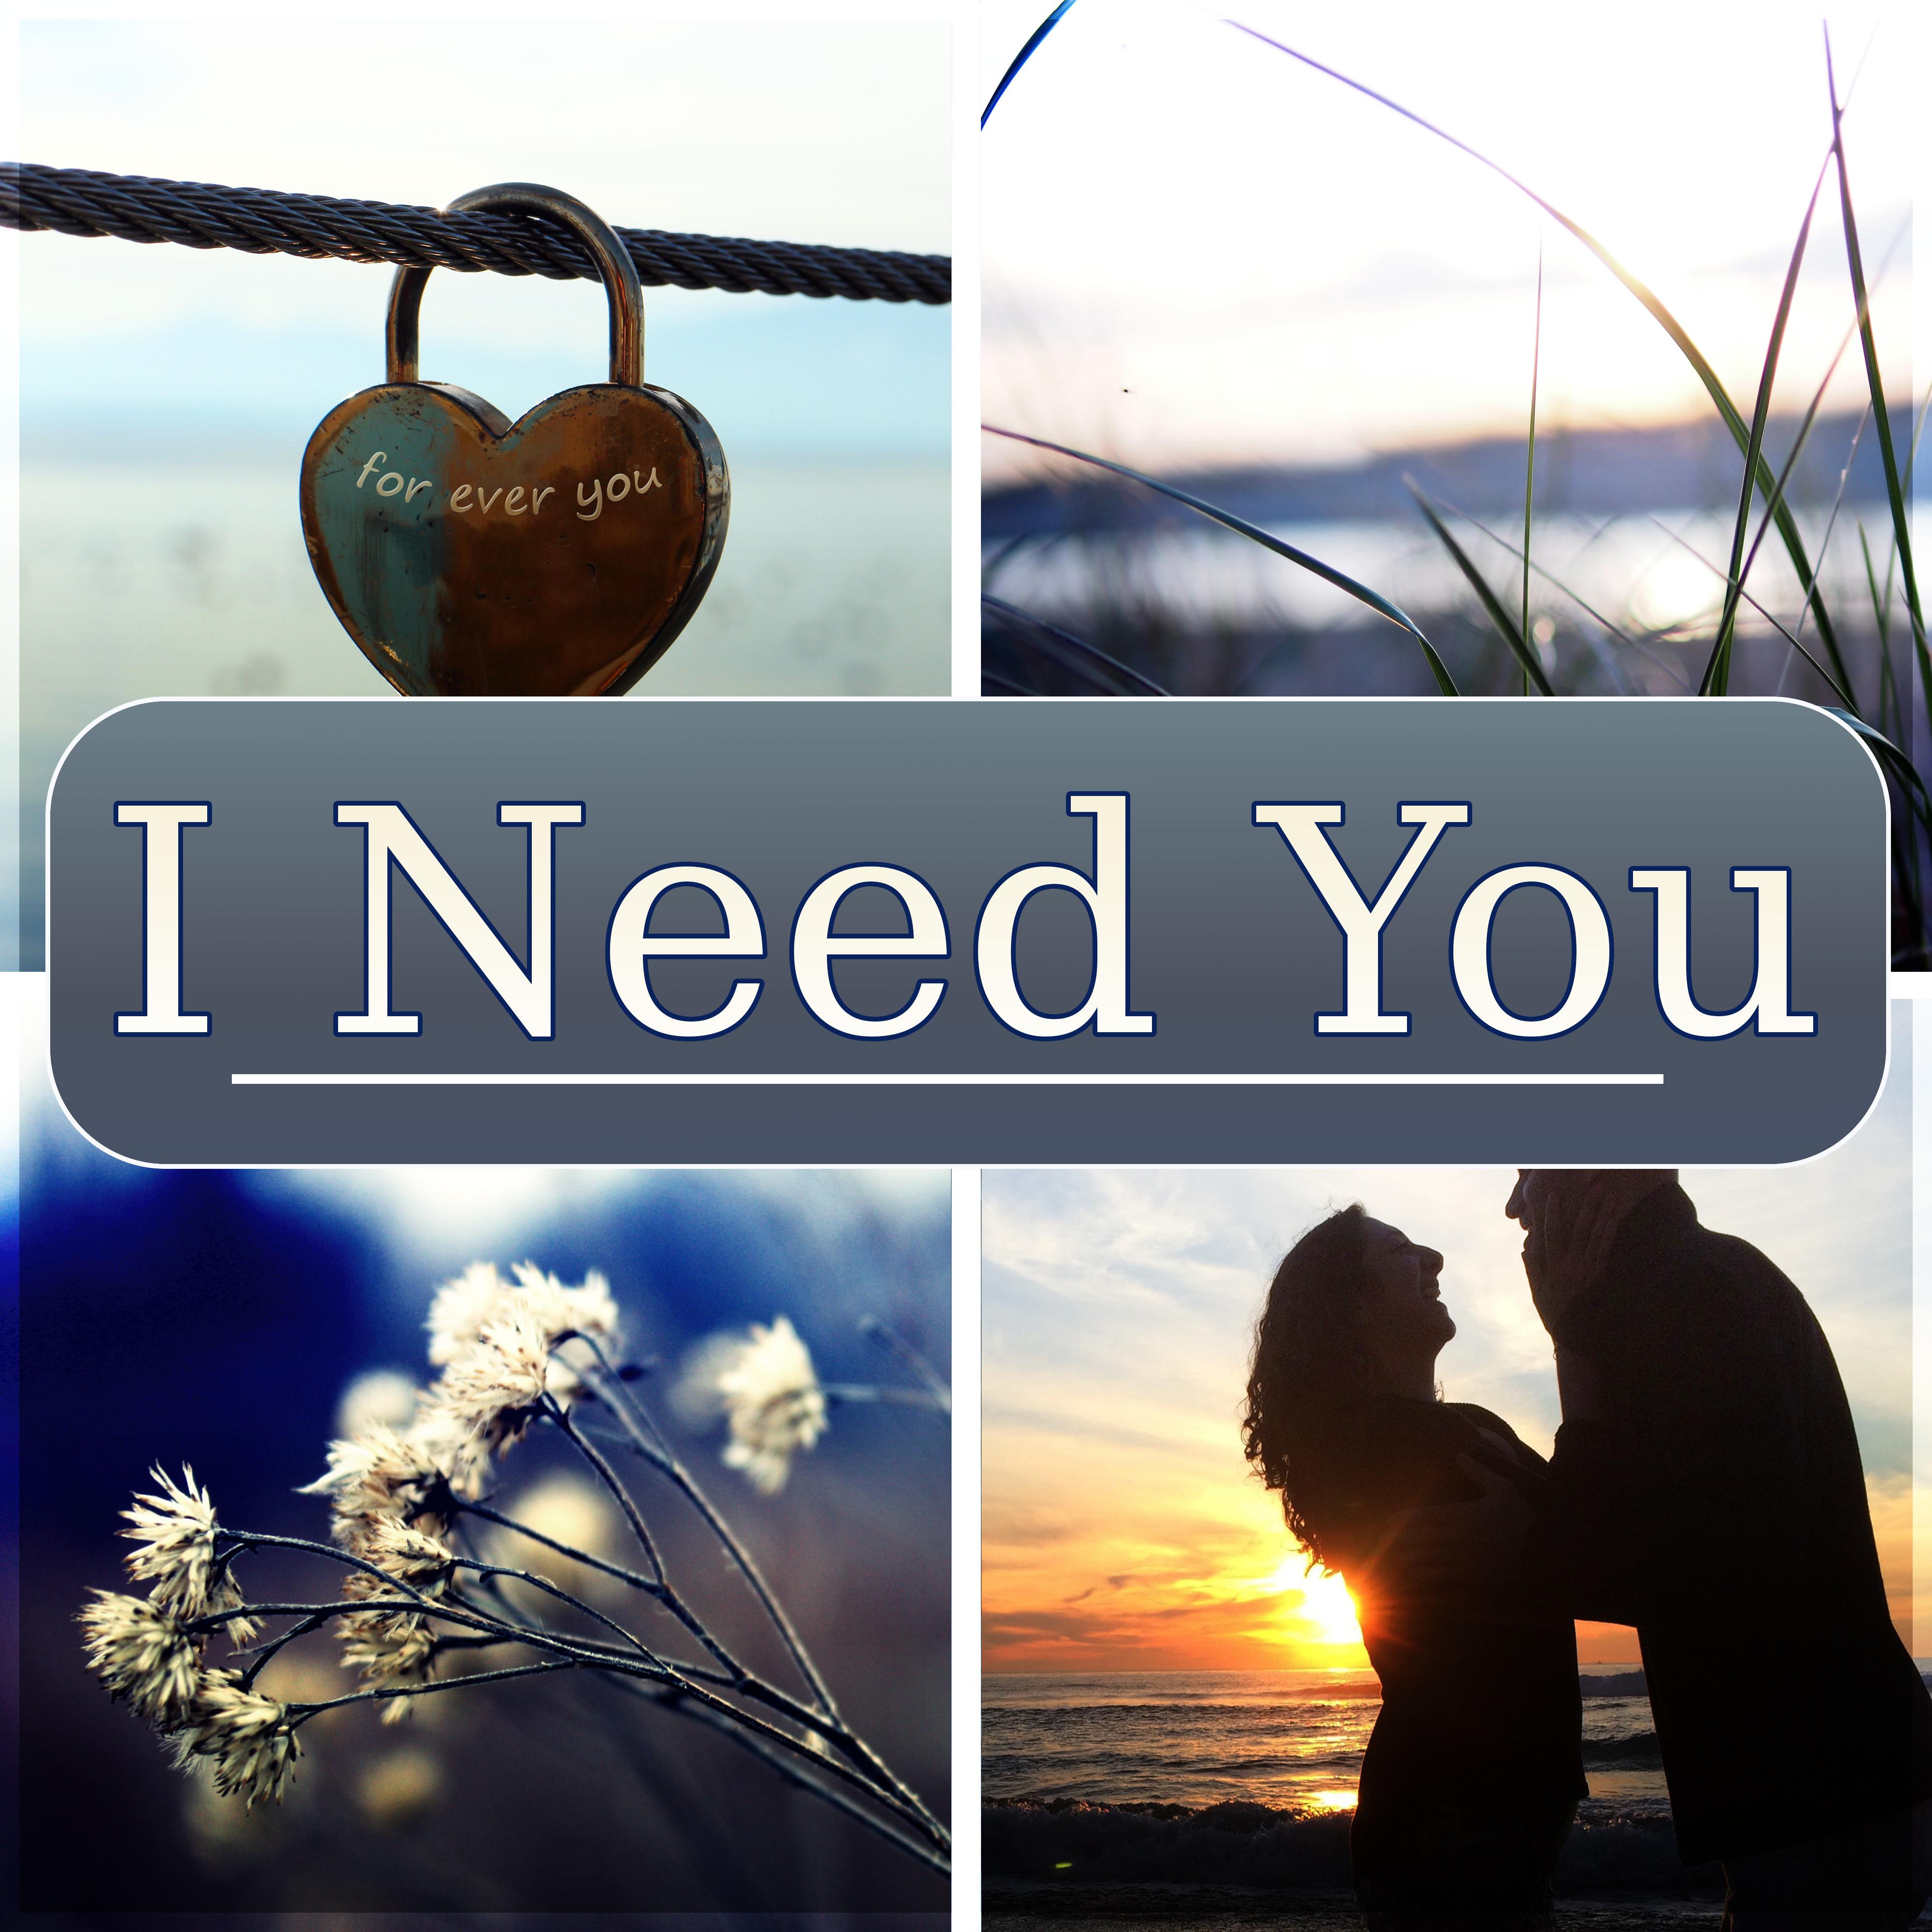 I Need You - Romantic Date Ideas, Intimate Moments and Valentine's Day, Soft Piano Music